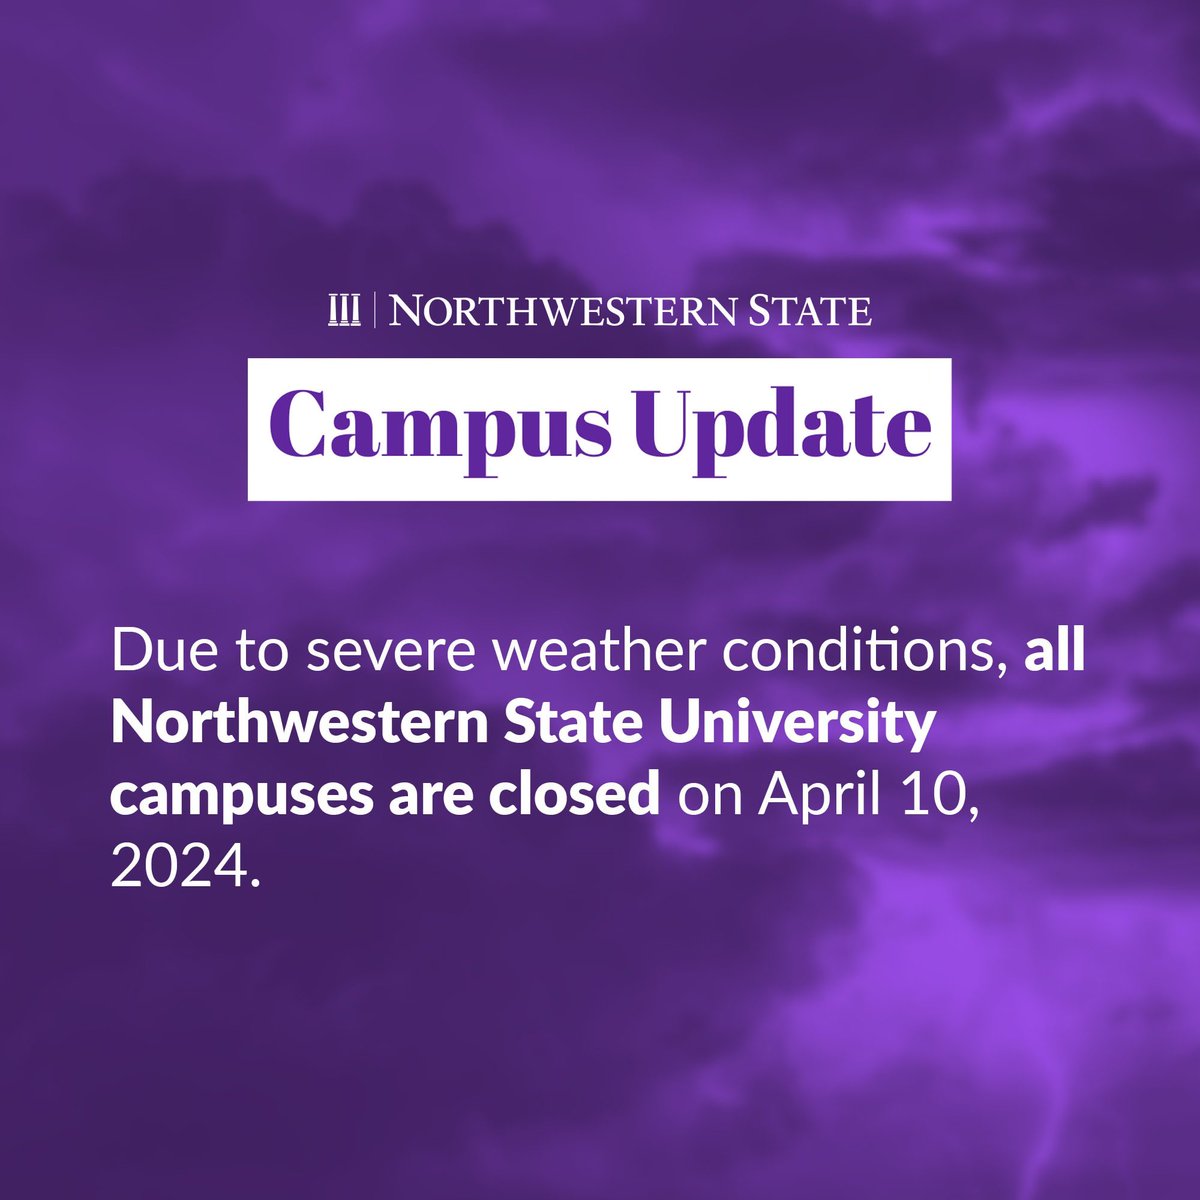 All Northwestern State University campuses will be closed on April 10, 2024, due to severe weather conditions.  All classes and events will be cancelled or postponed.